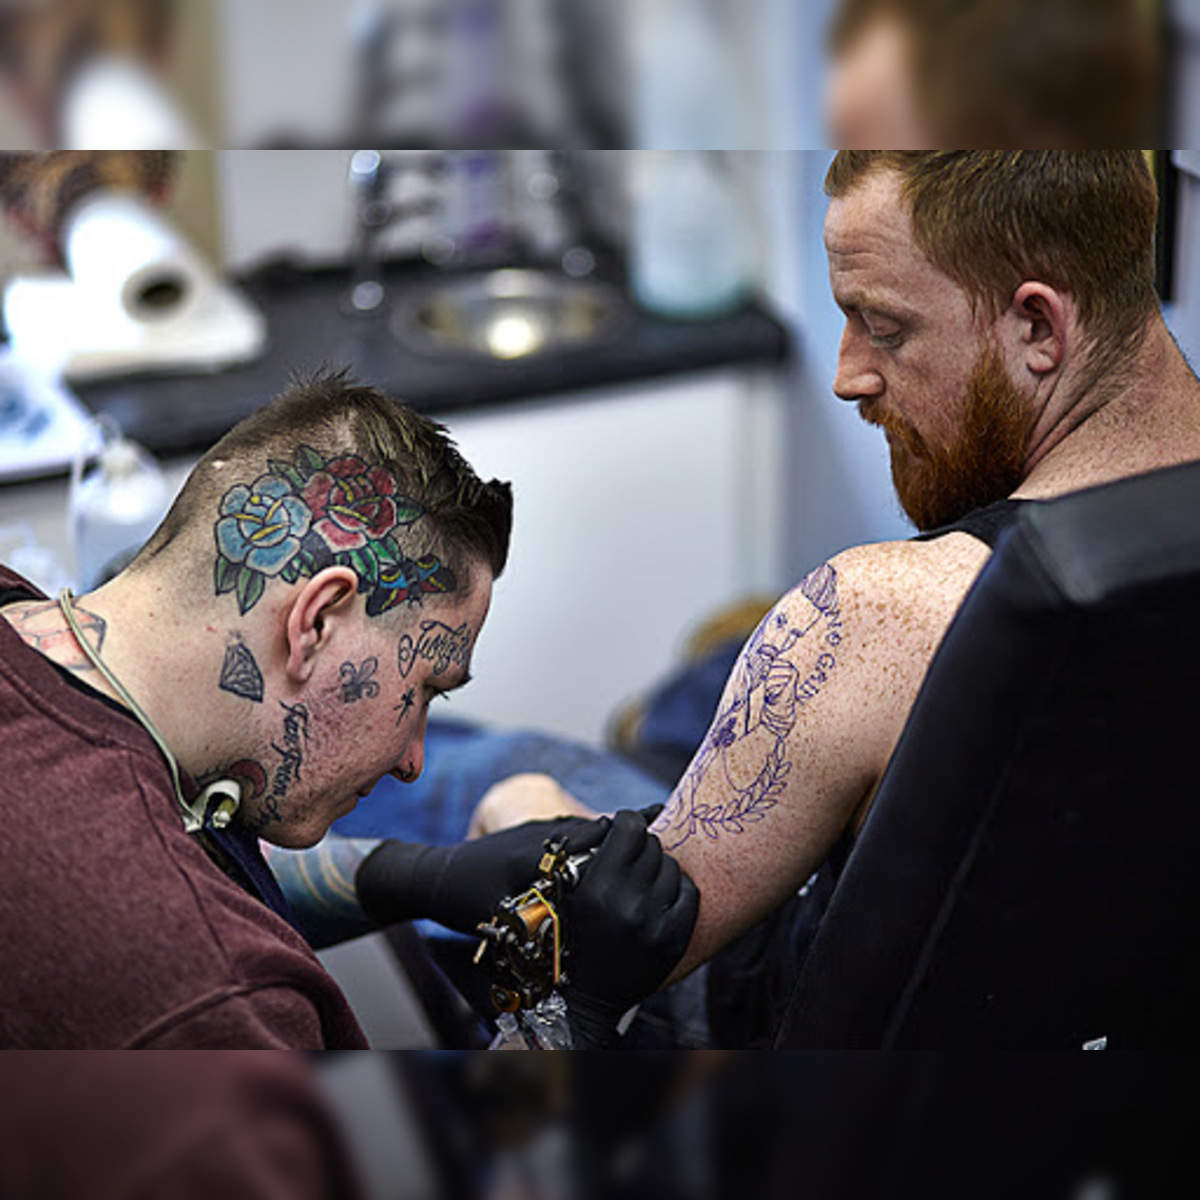 7 Key Things To Keep In Mind Before Getting A Tattoo